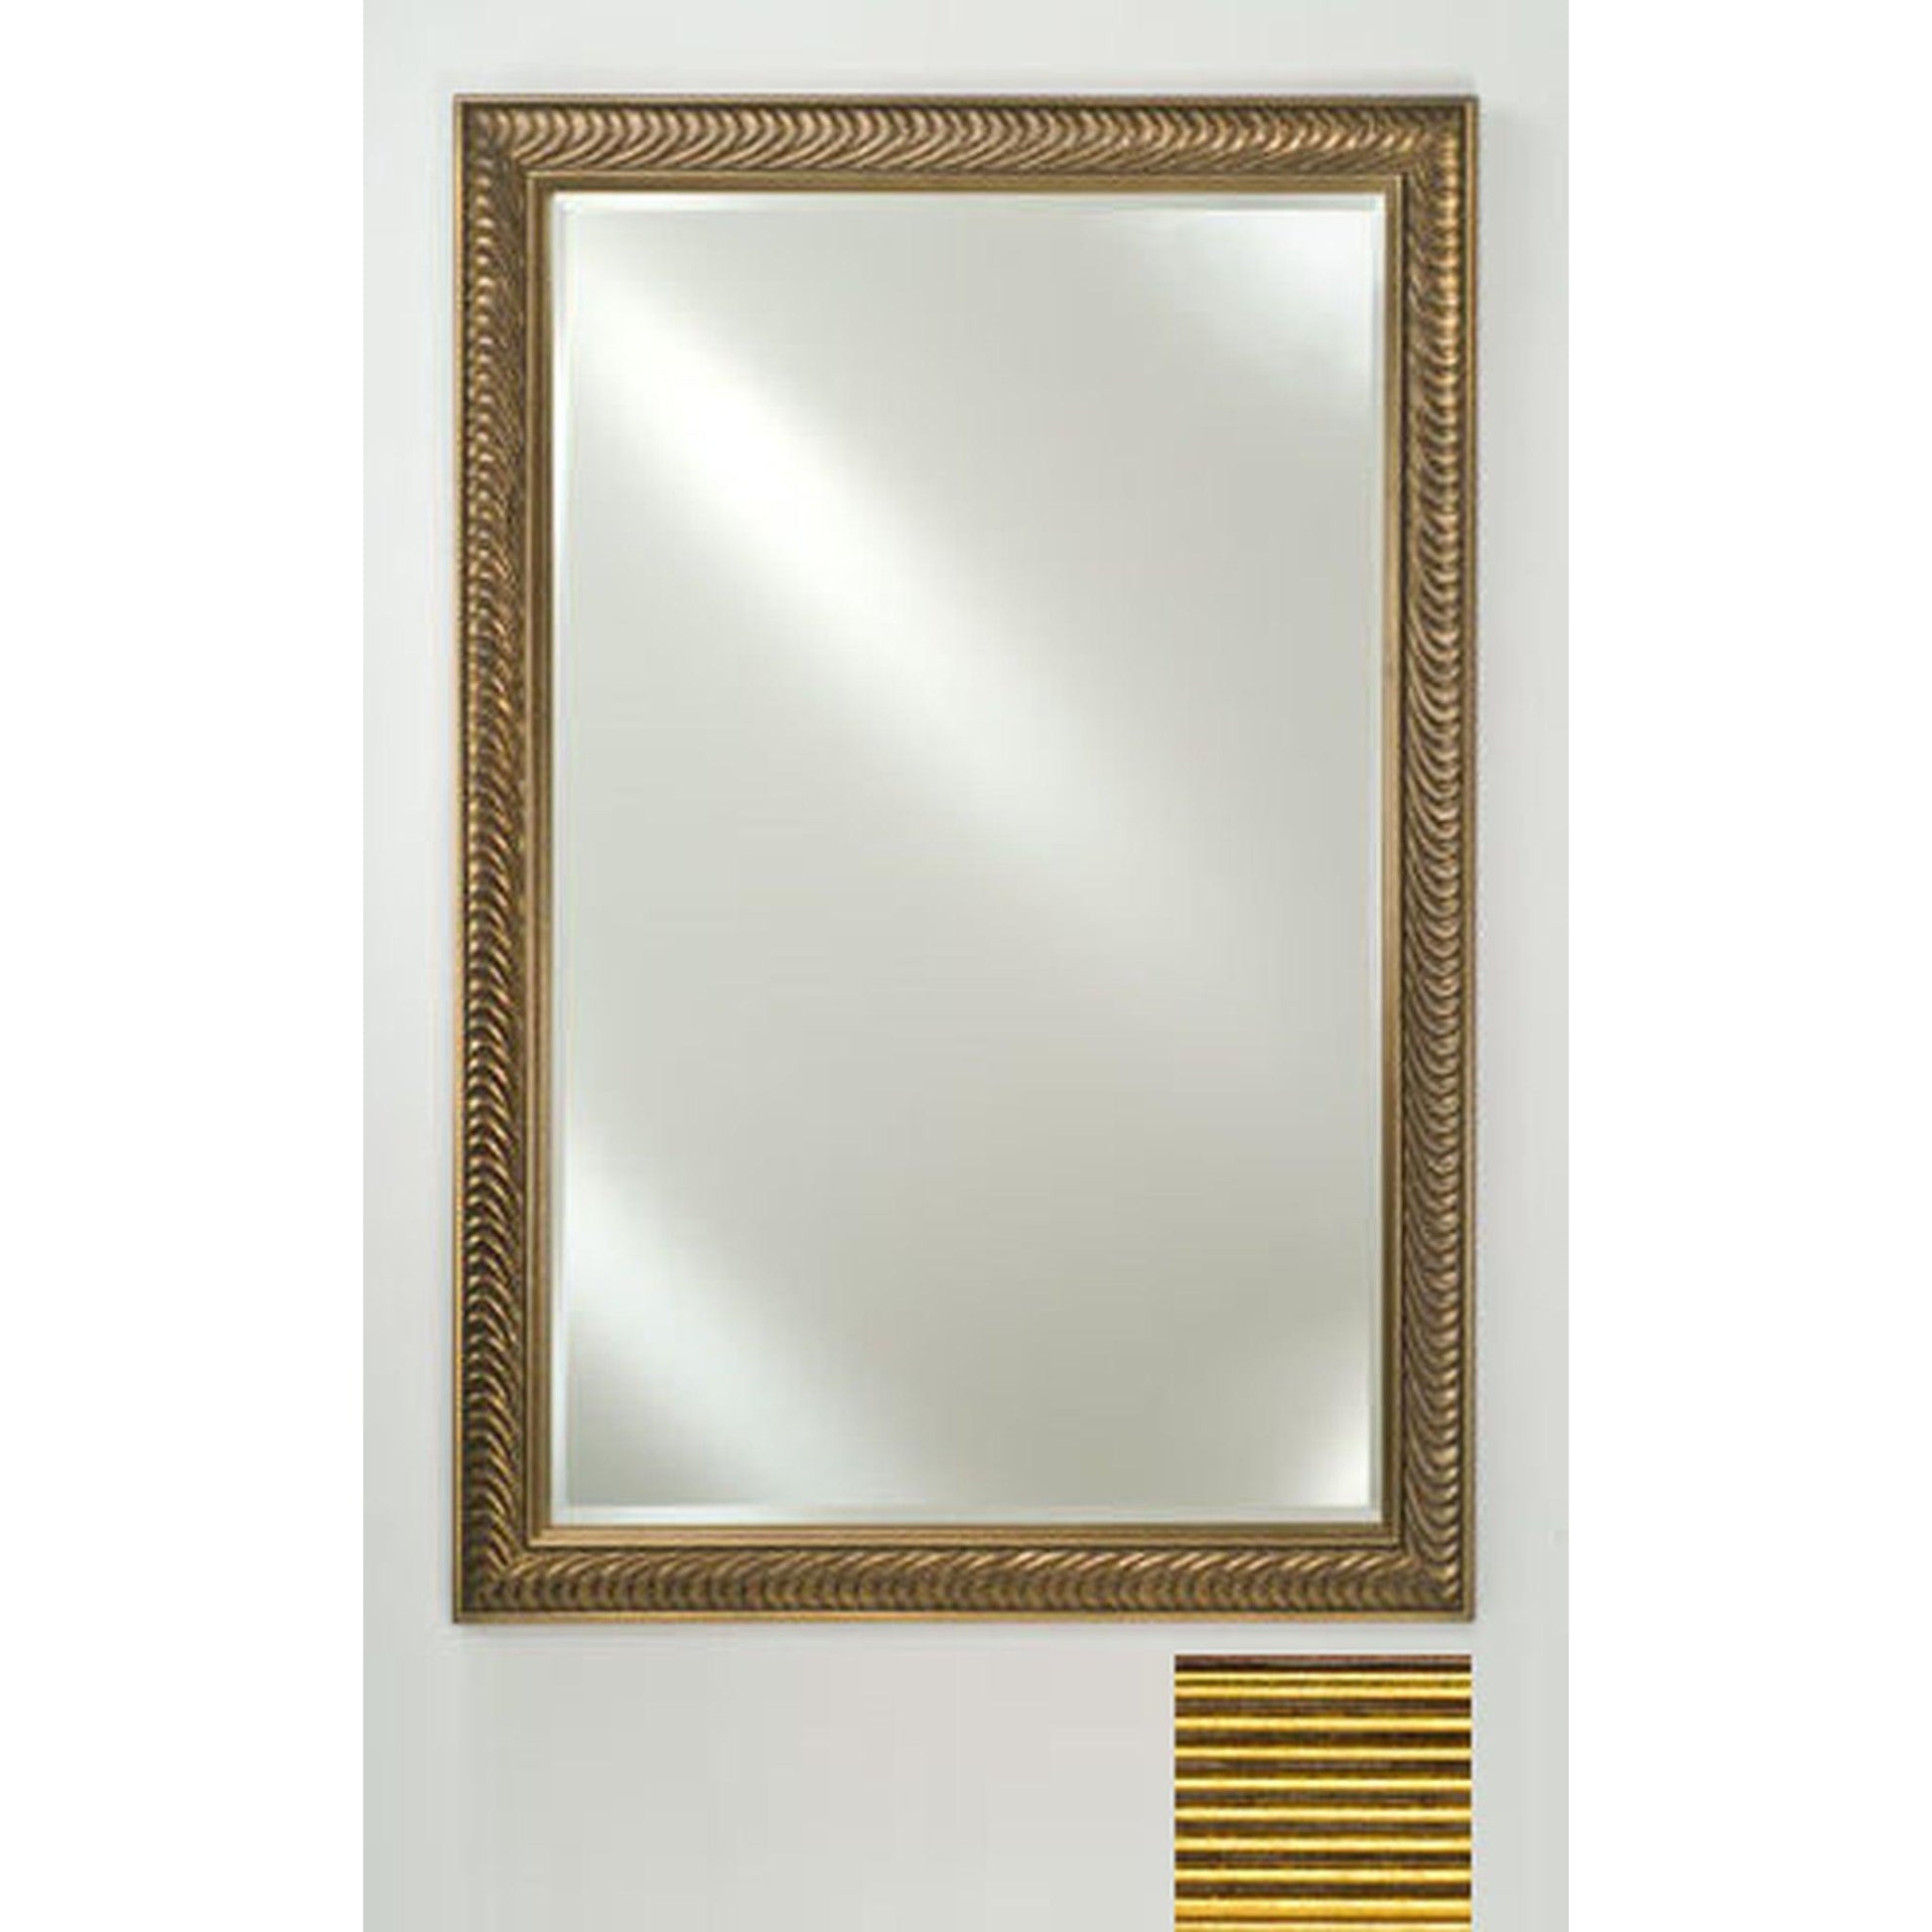 Afina Signature 20" x 26" Meridian Antique Gold With Antique Silver Caps Framed Mirror With Beveled Edge